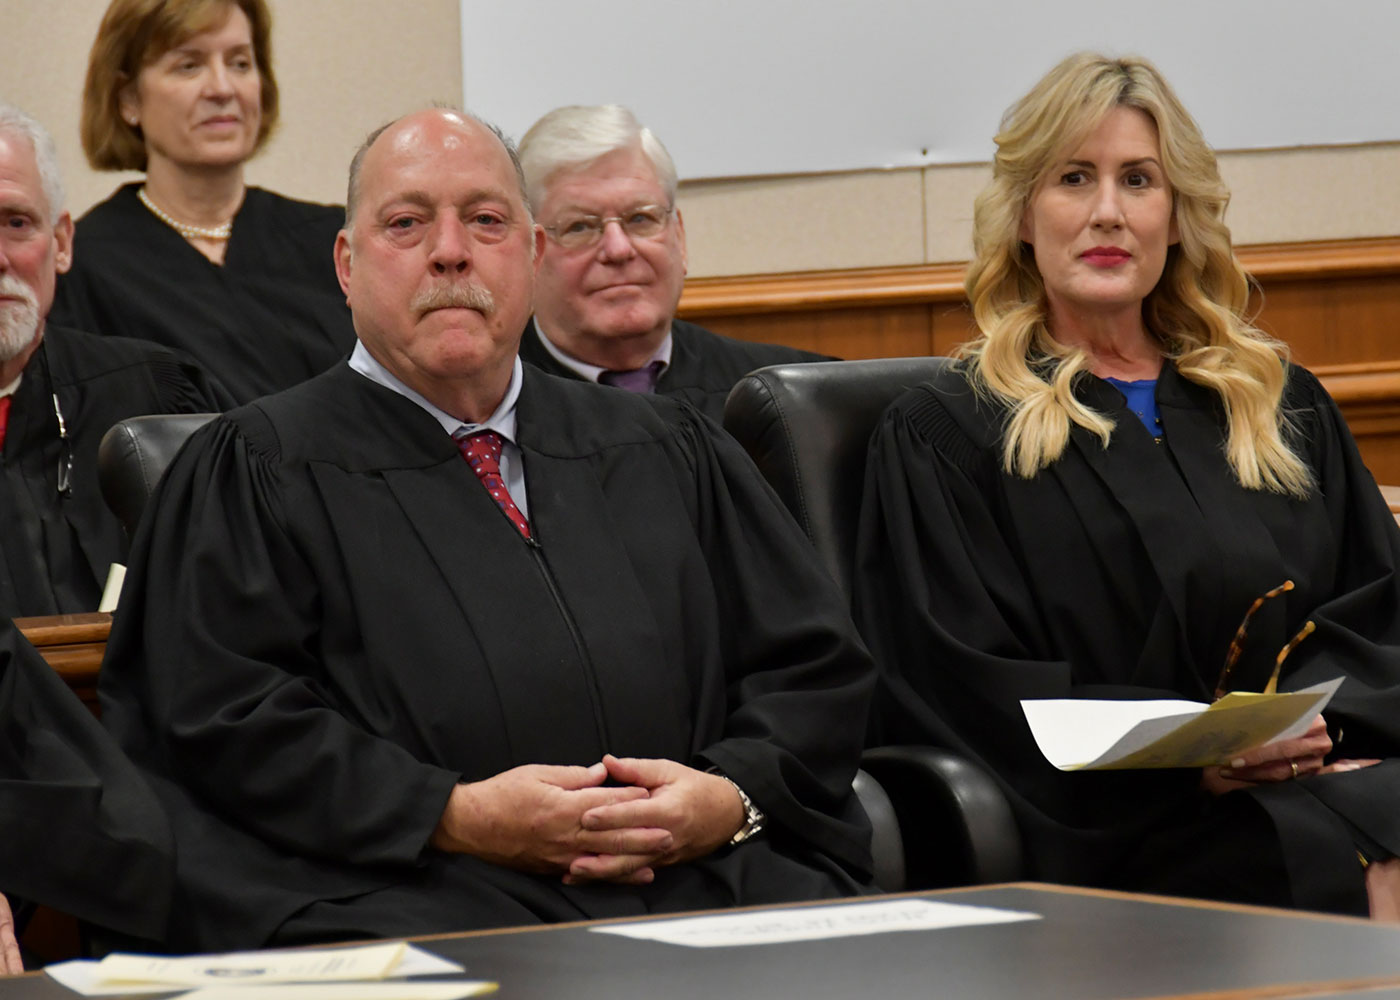 Judge Black and Judge Zeller enjoy final remarks at the close of the Investiture Ceremony.